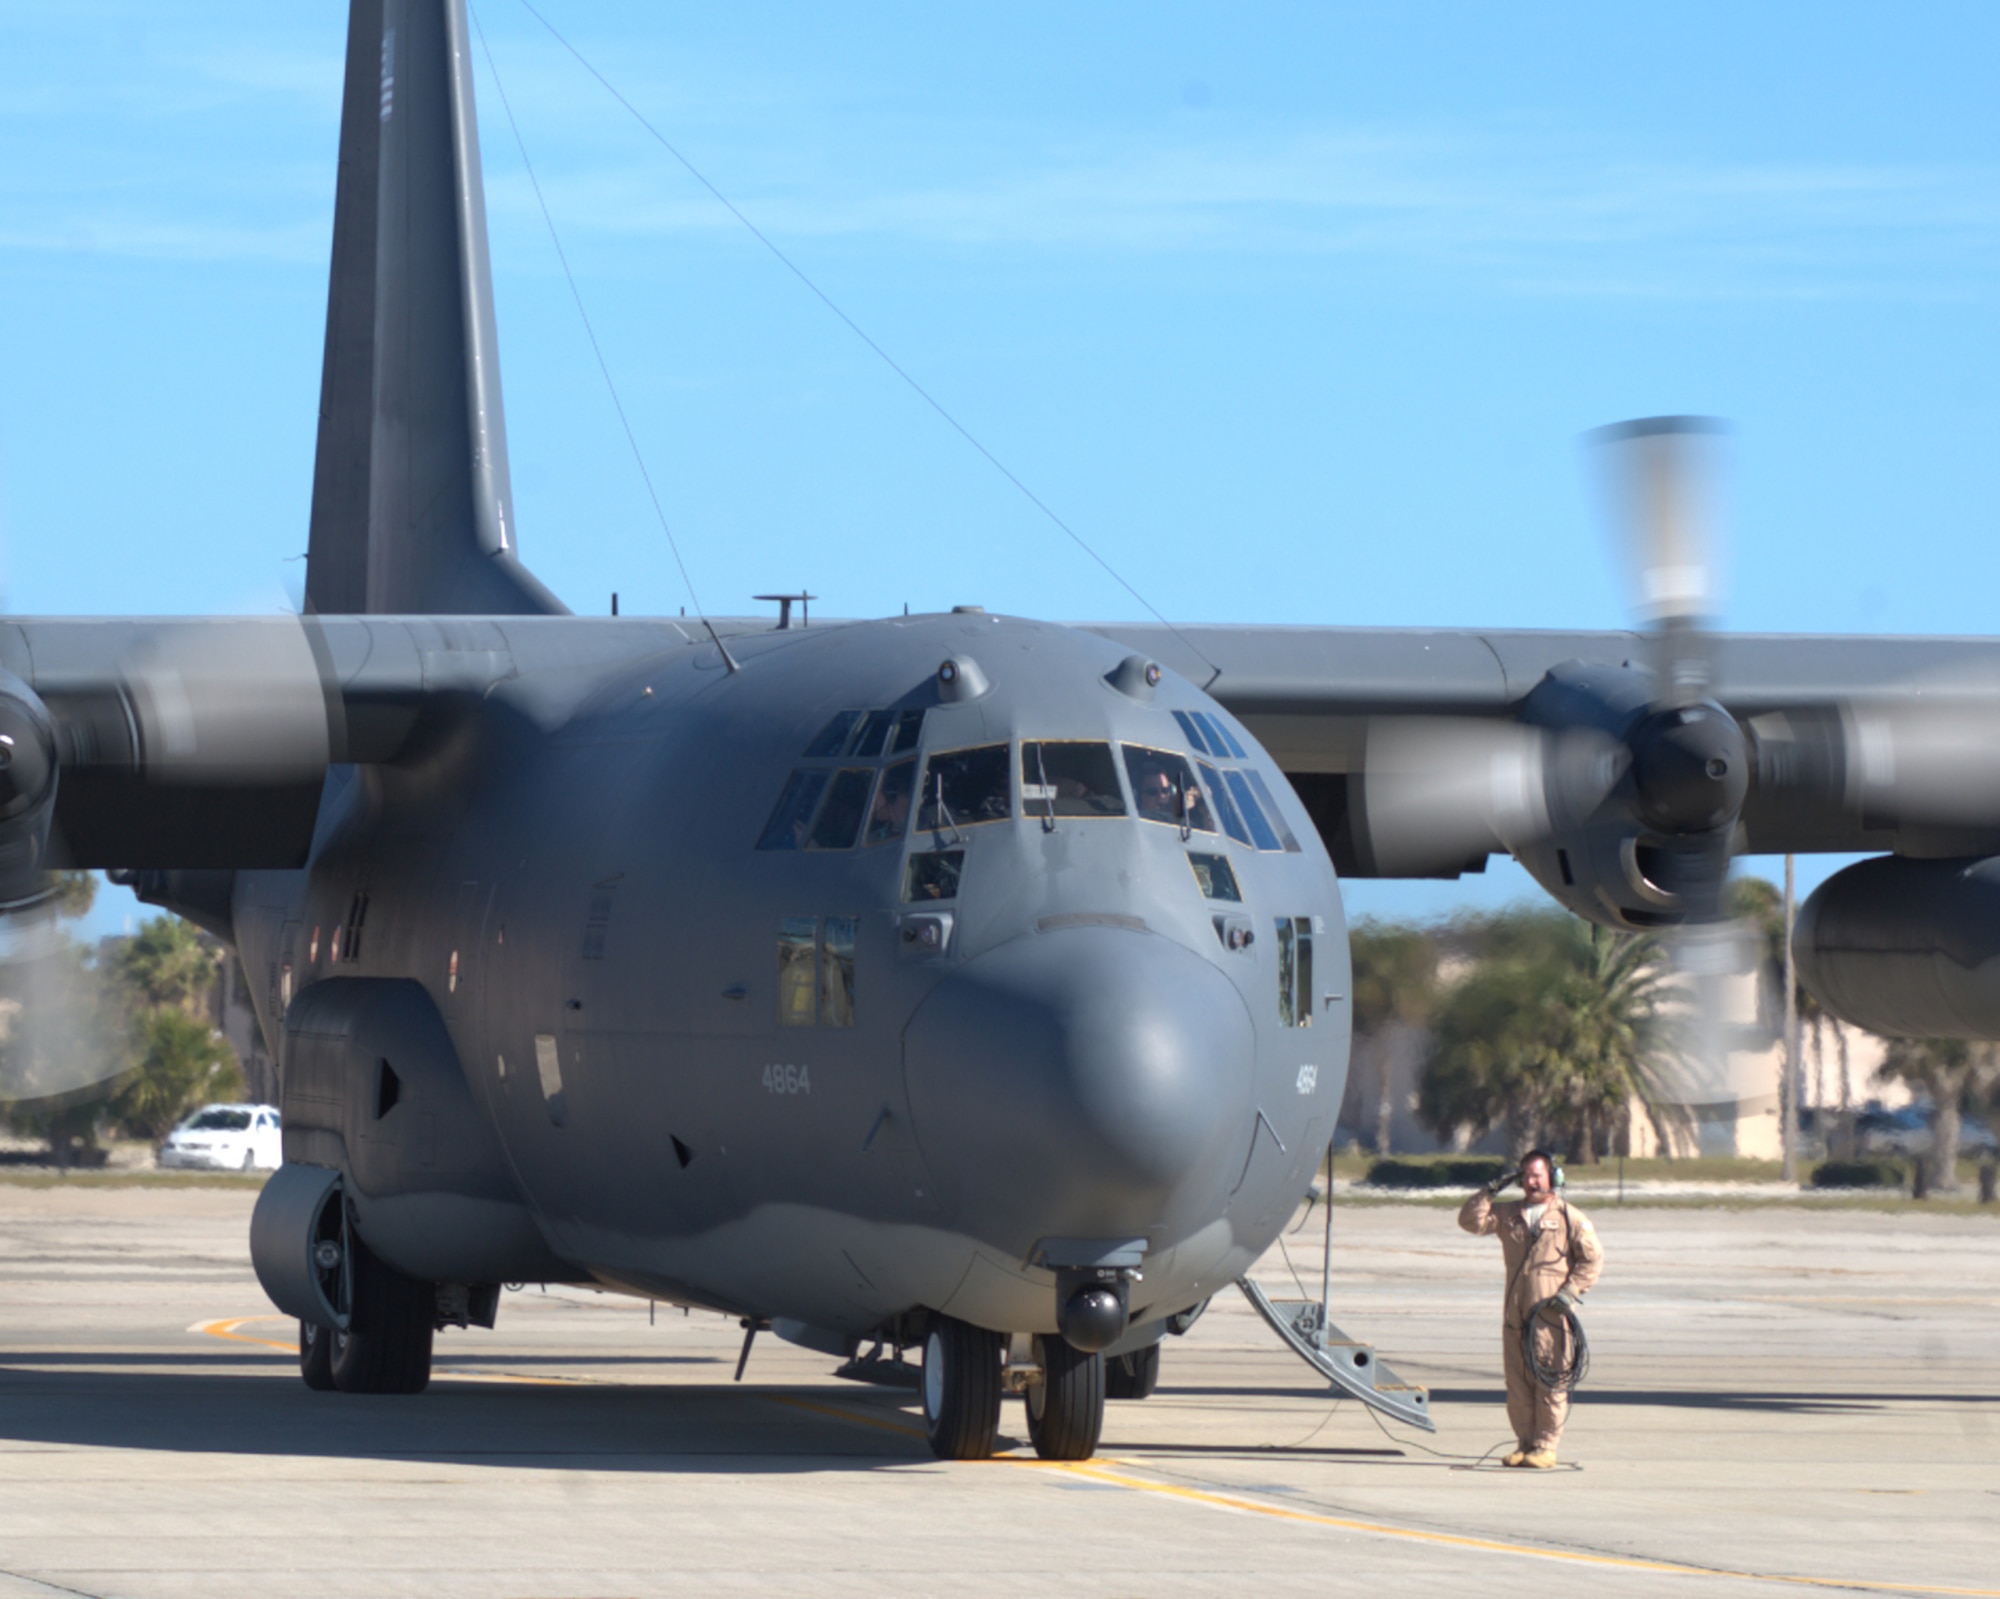 An HC-130P/N King refueling aircraft, piloted by Rescue Wing Airmen of the 920th Rescue Wing, Patrick Air Force Base, Fla., prepares to take off Jan 25. An estimated 30 Rescue Wing Airmen deployed in two of the wing's HC-130's to the Horn of Africa. The C-130's will be used to fly missions throughout the region in support of the ongoing search and rescue and humanitarian relief efforts there. (U.S. Air Force photo/Master Sgt. Rob Grande)